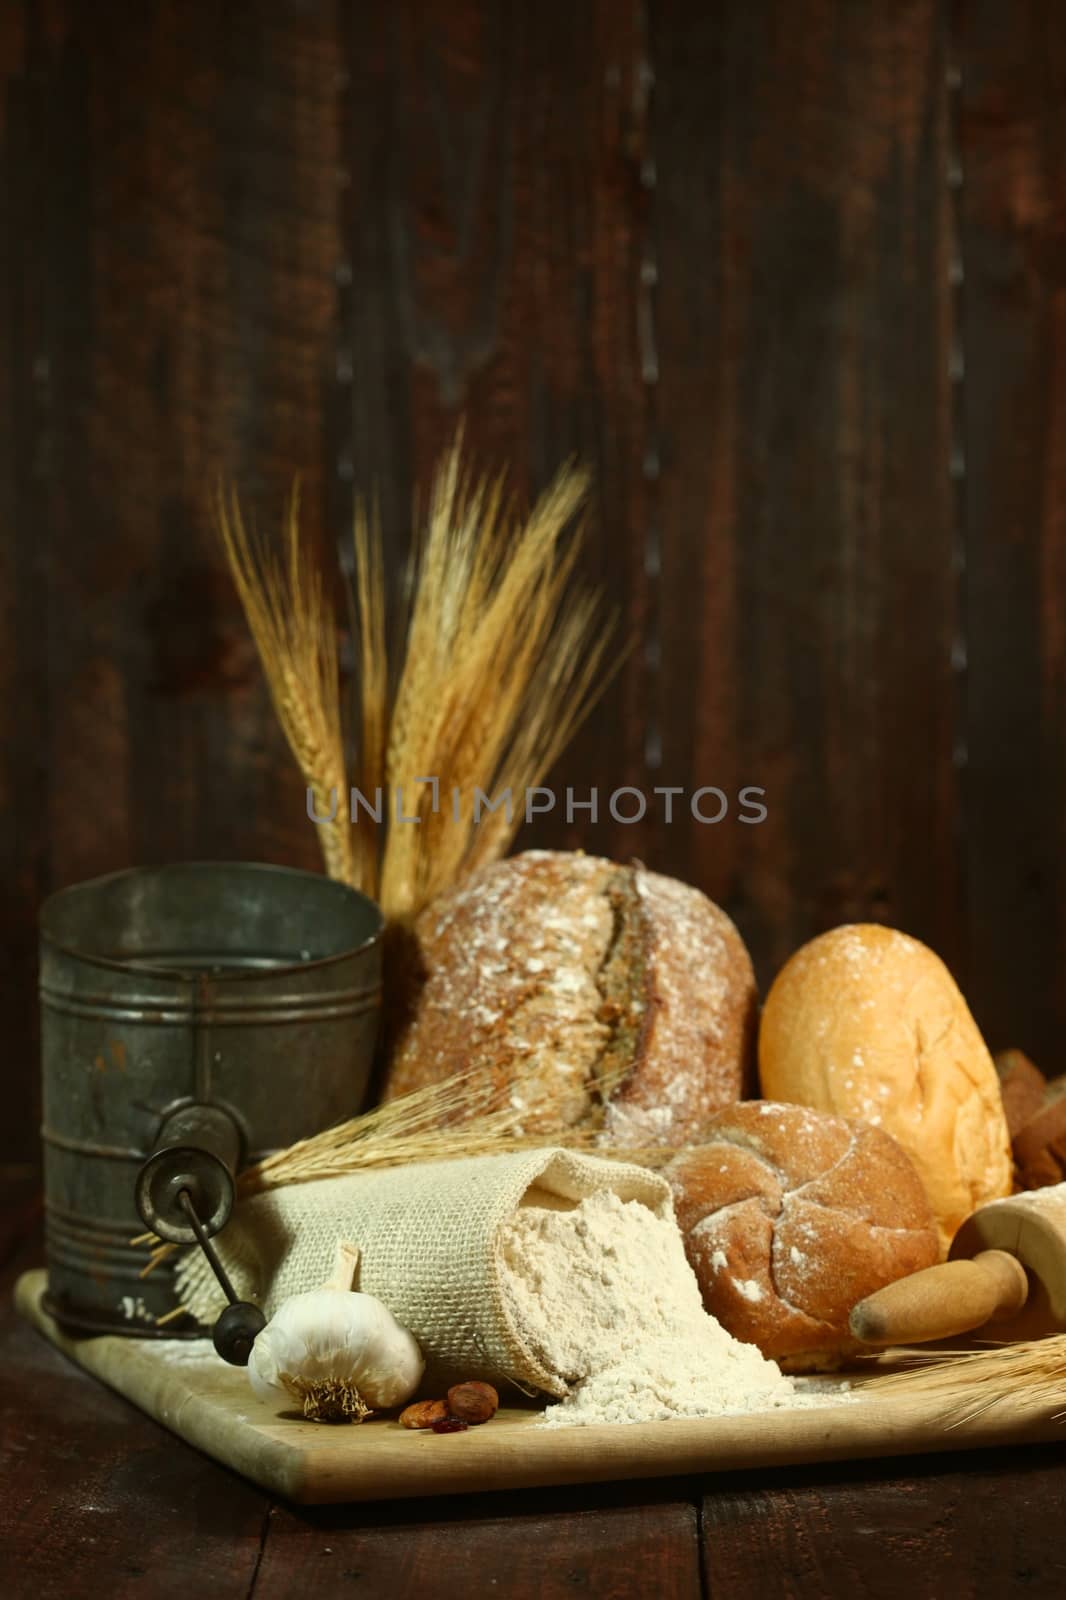 Fresh Baked Bread on Wooden Background